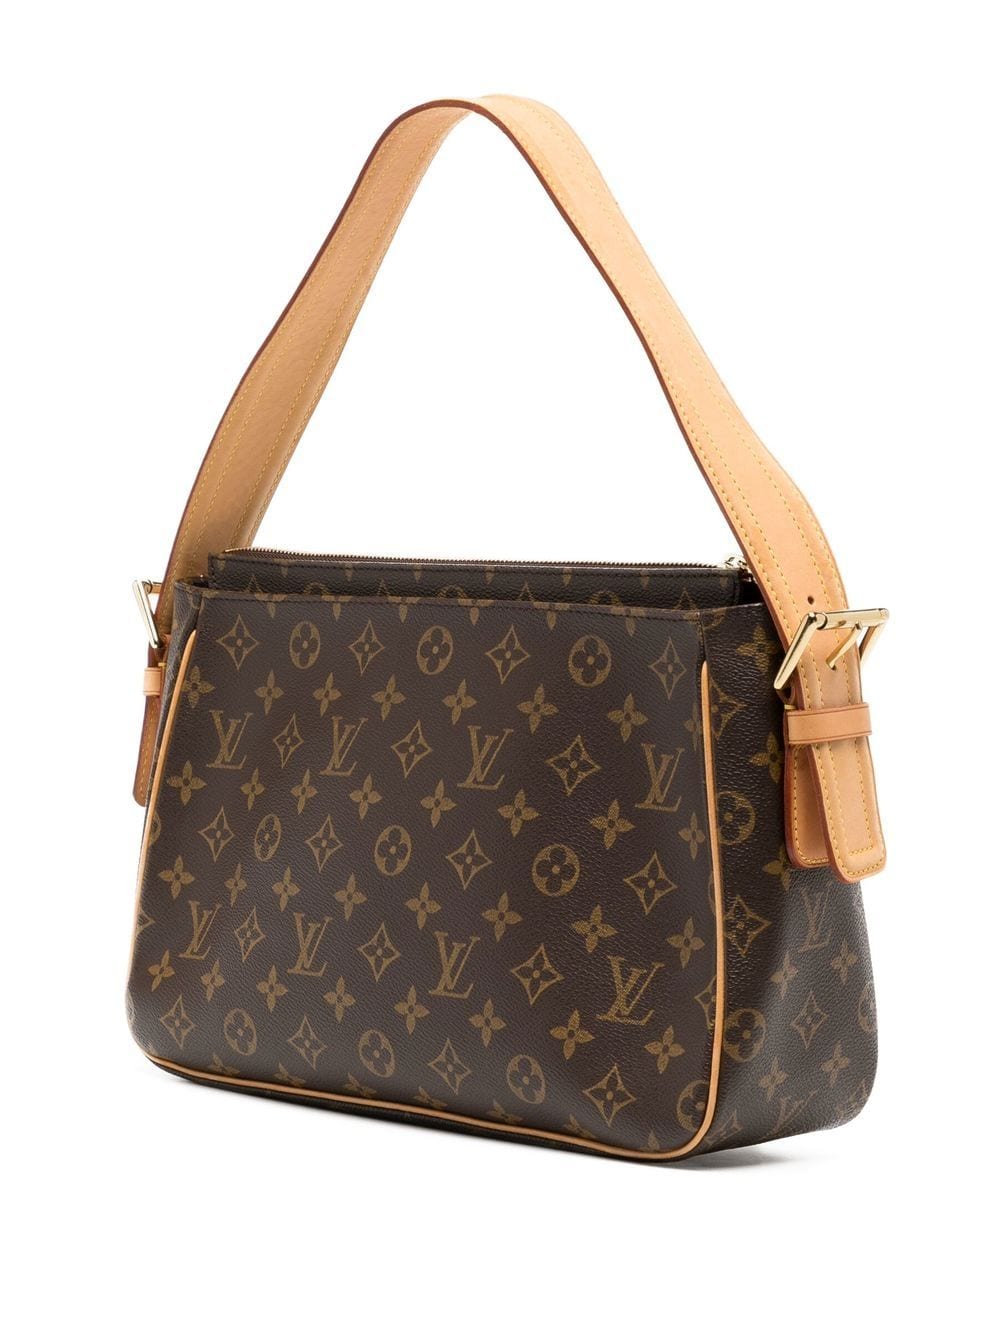 Pre-owned Louis Vuitton 2003 Excentri-cite Tote Bag In Brown